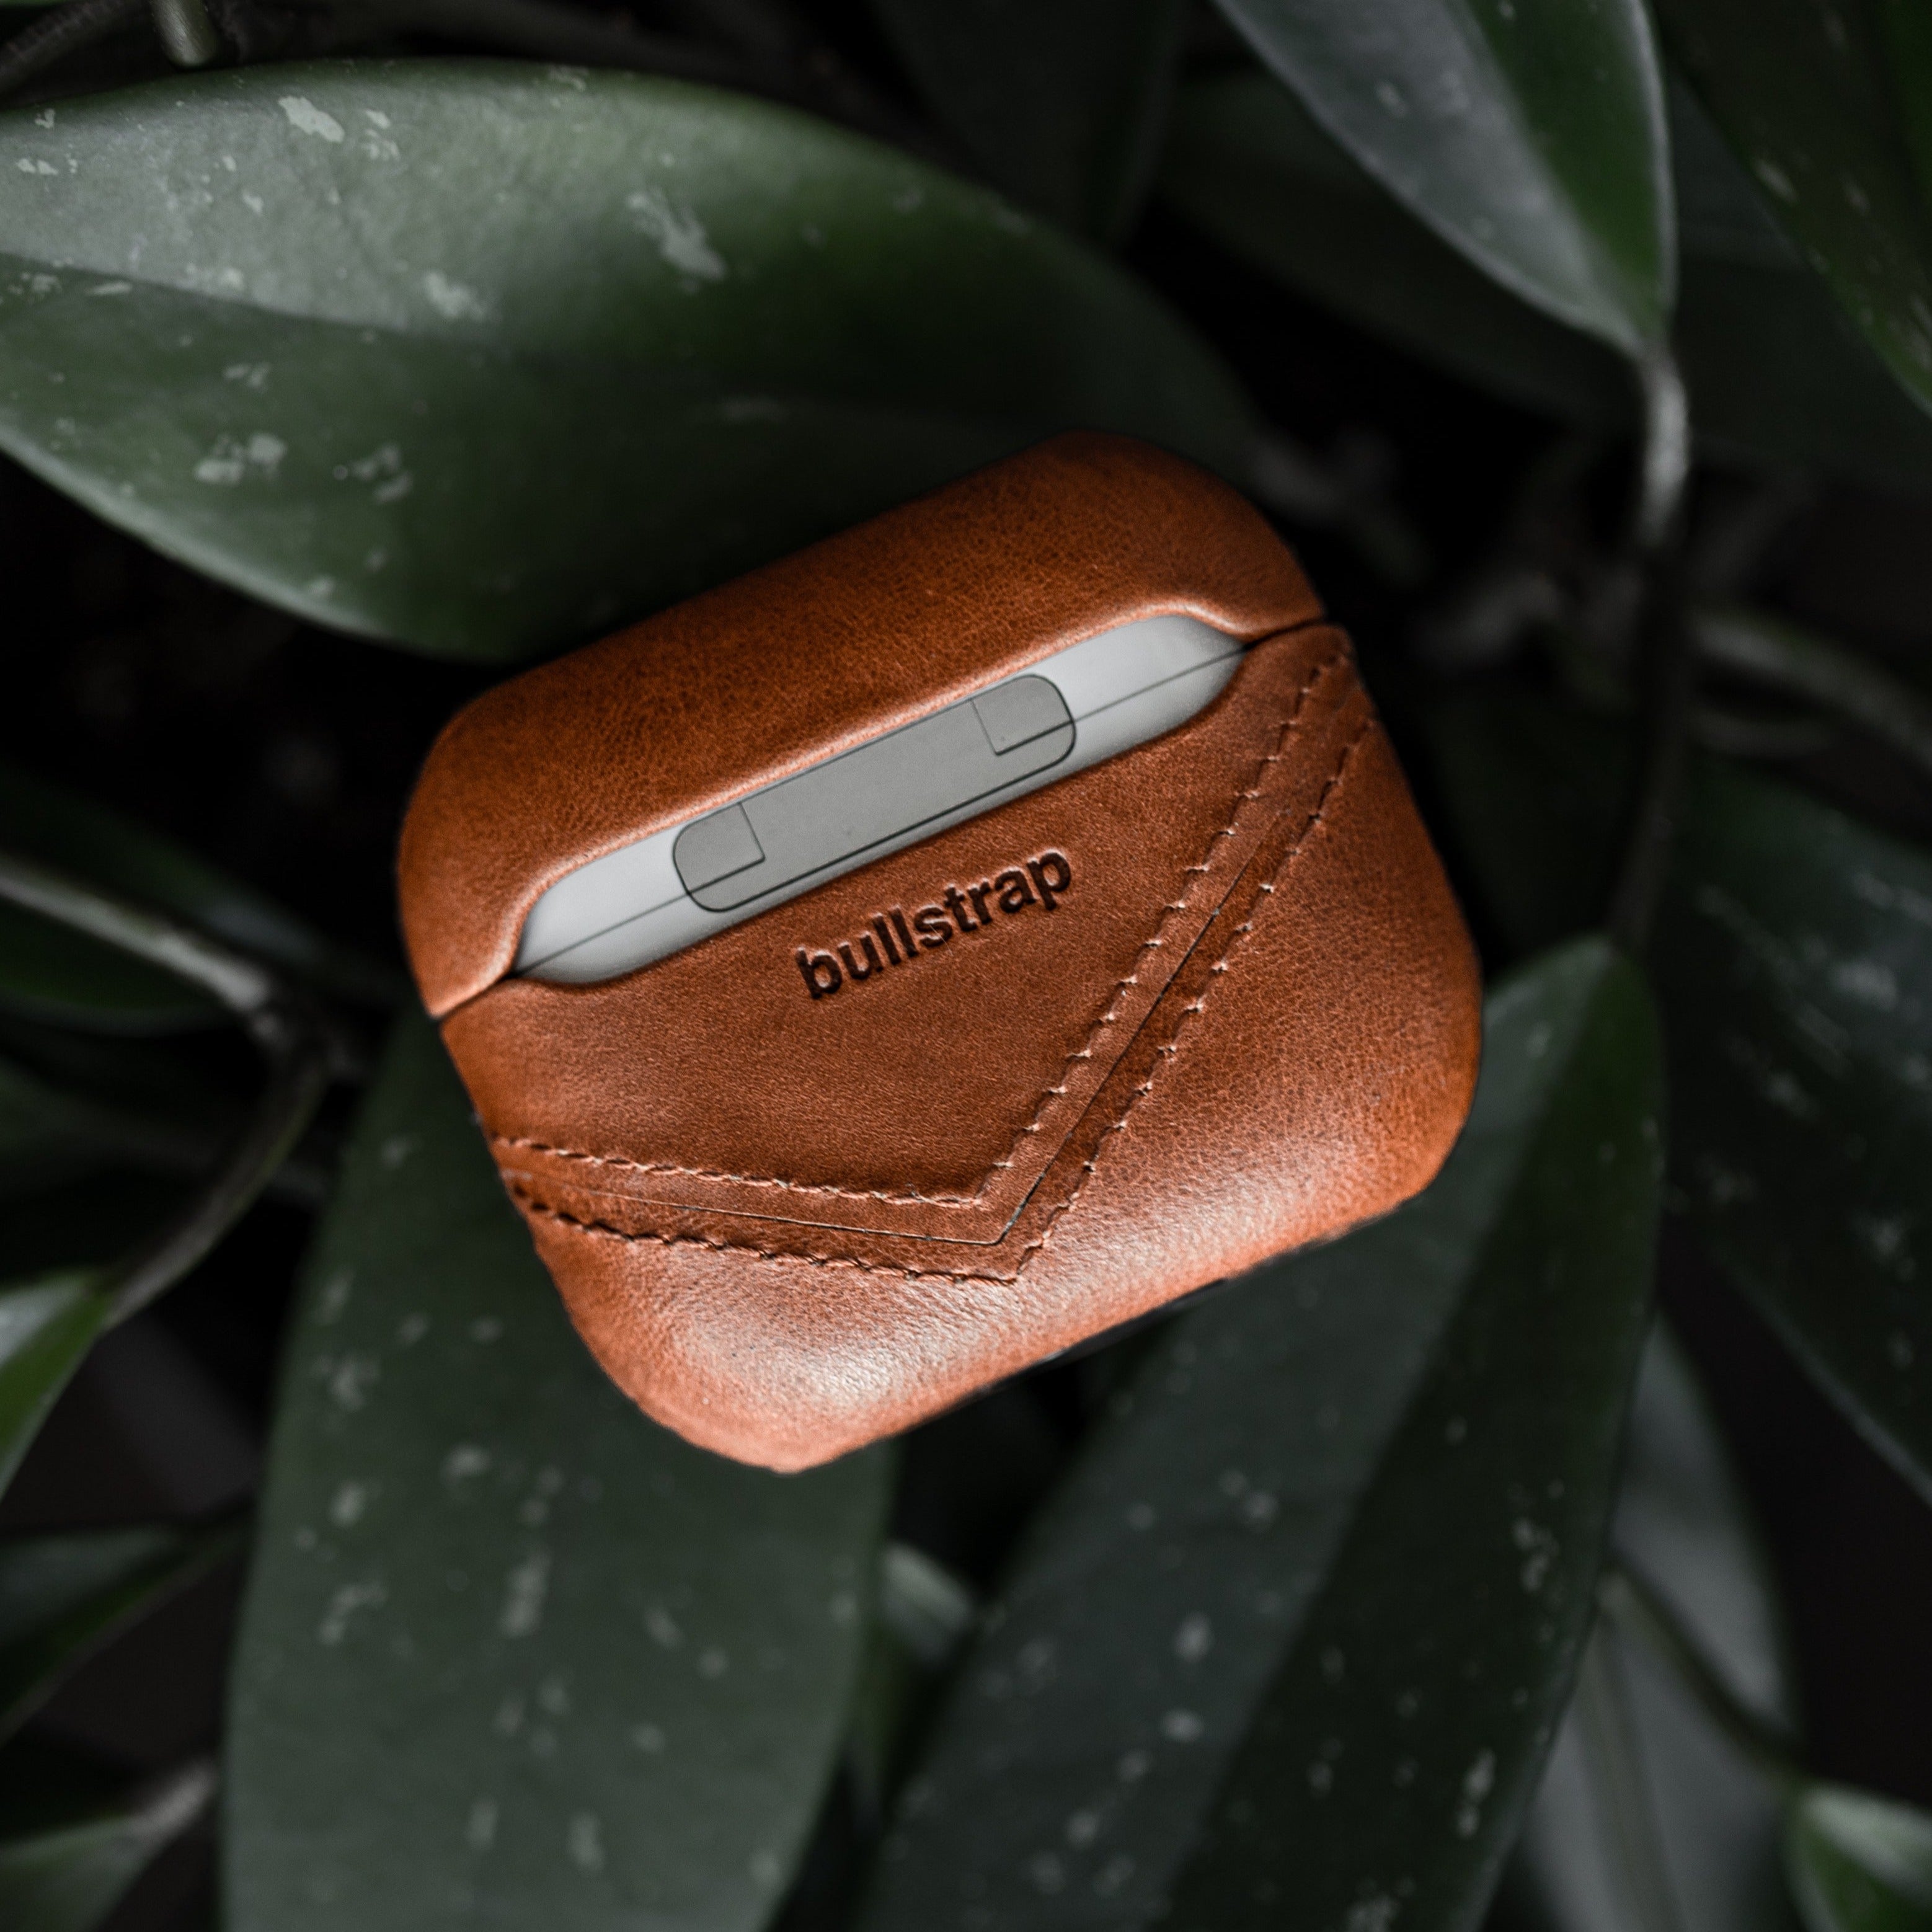 Leather AirPods Cases - SIENNA